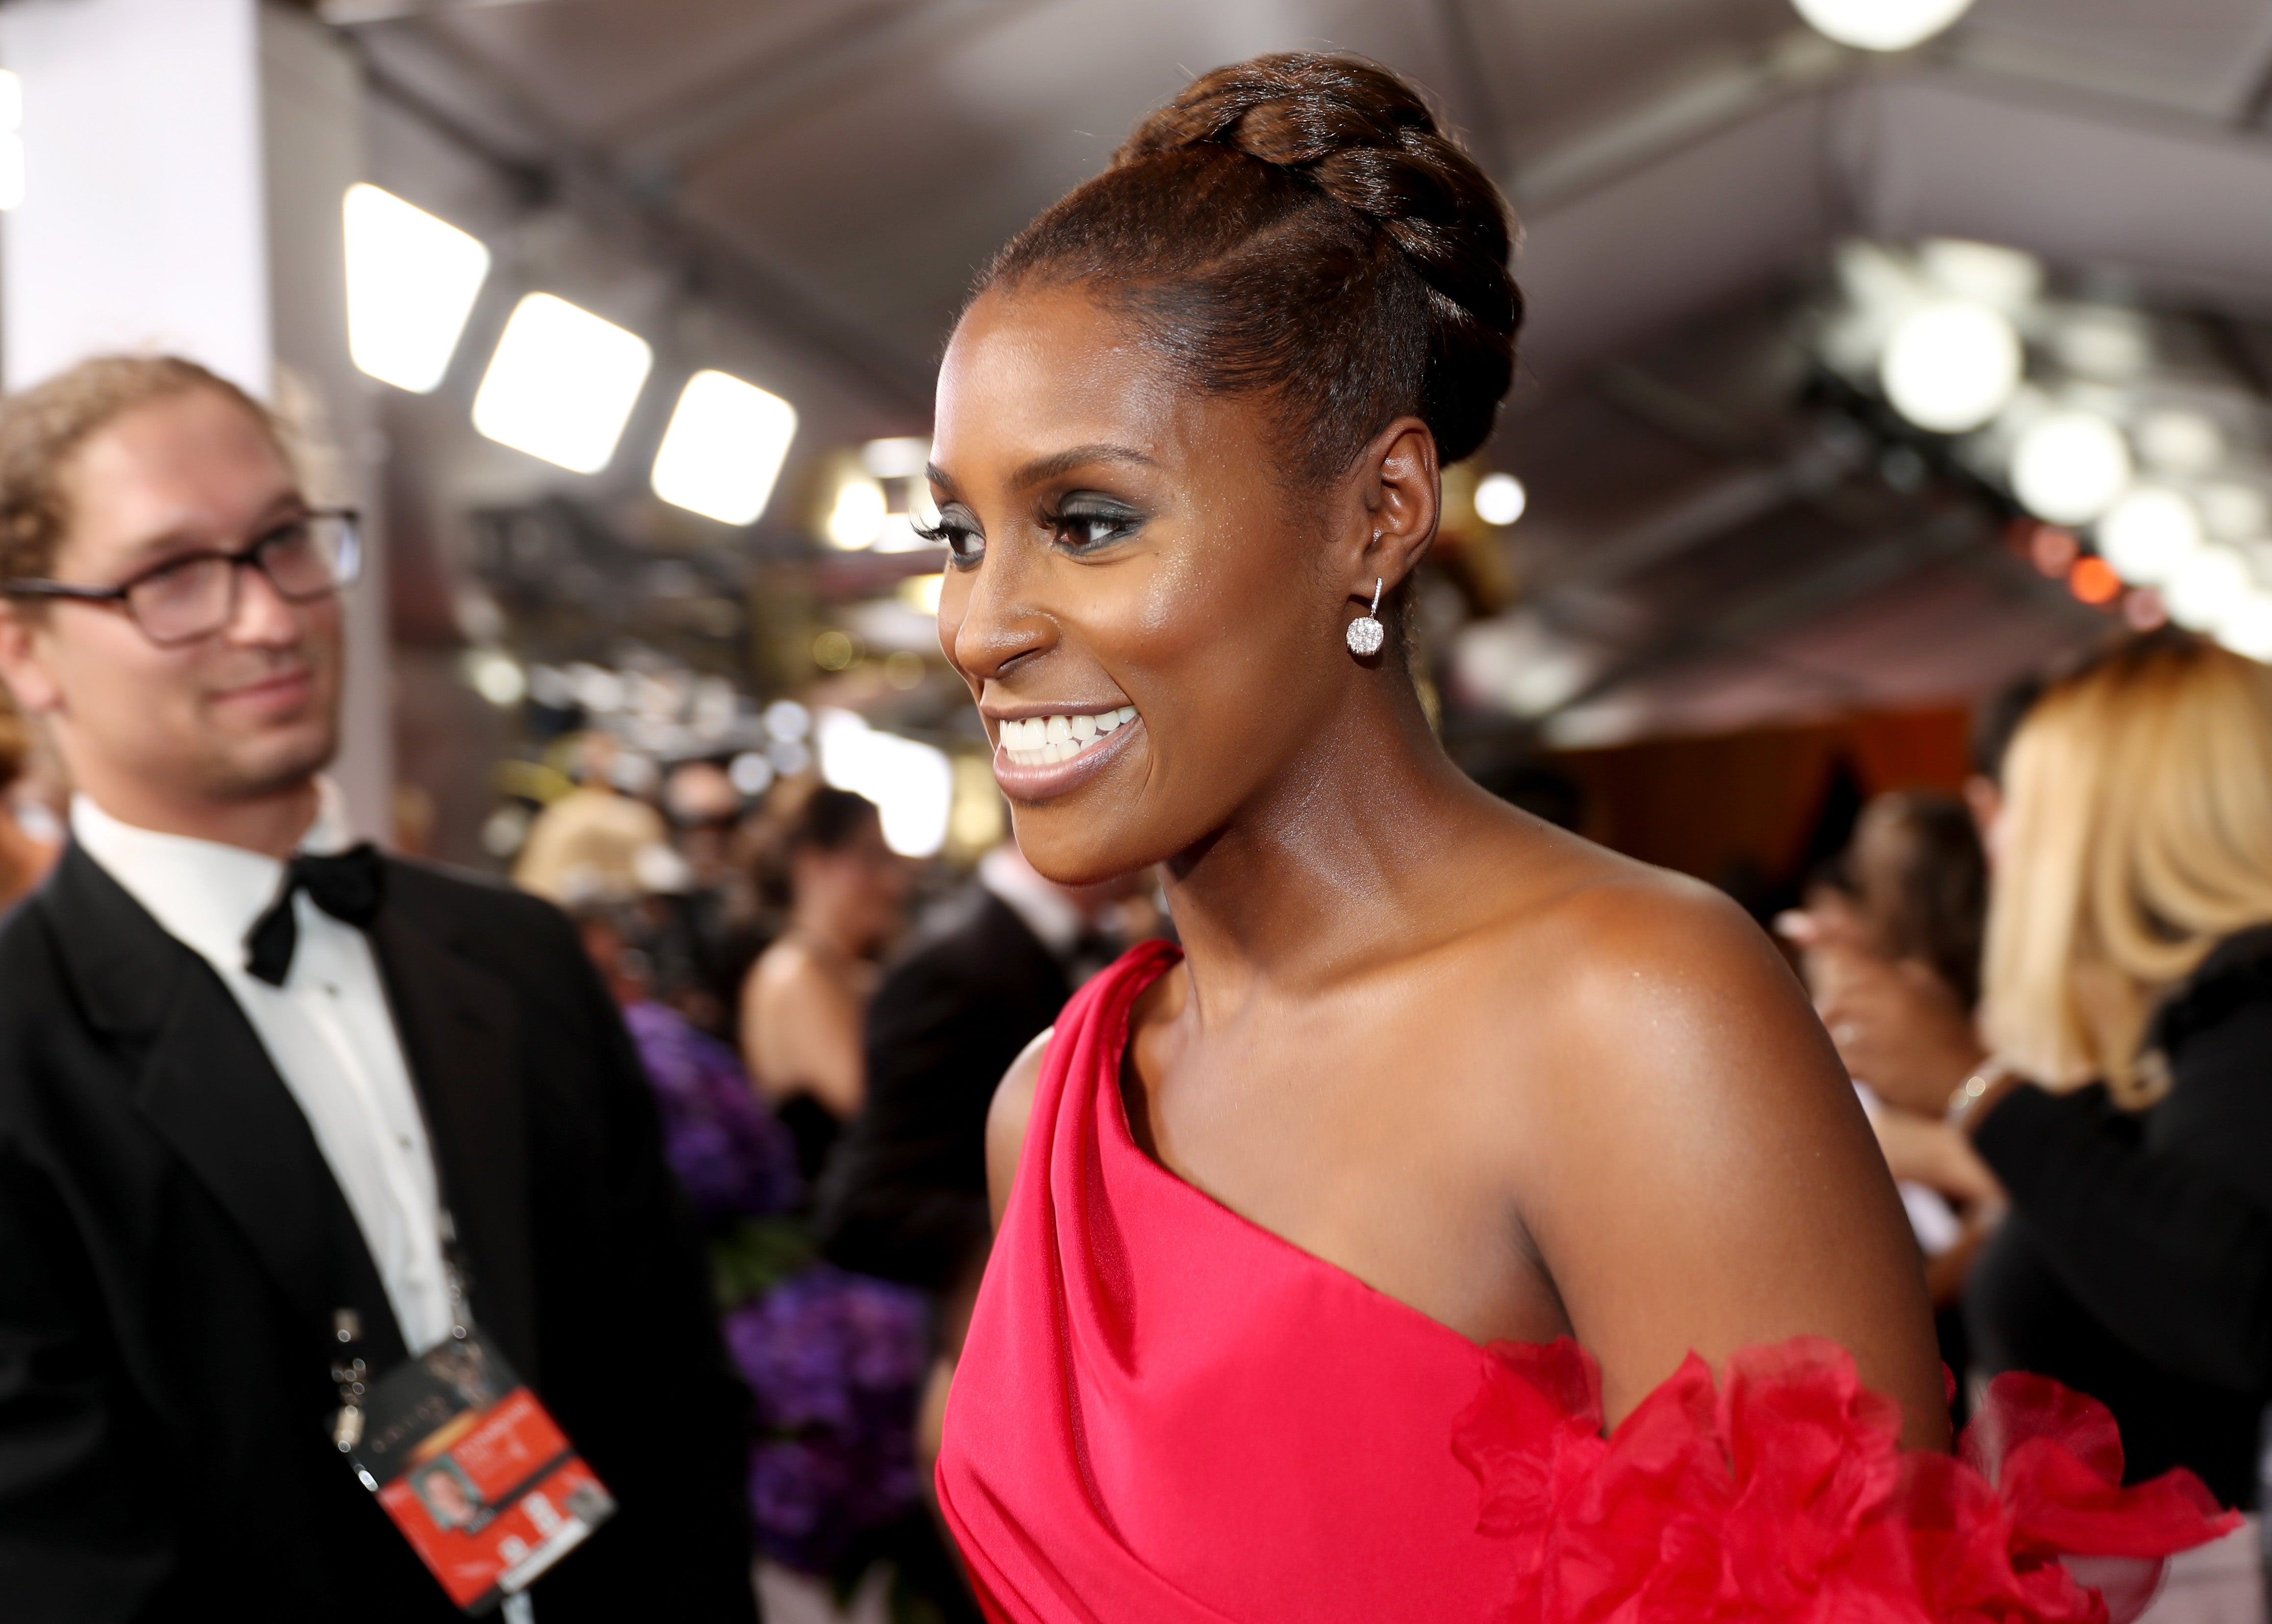 Issa Rae's Hair Timeline: 11 Stunning Looks From The Multi-Talent Over The Years
